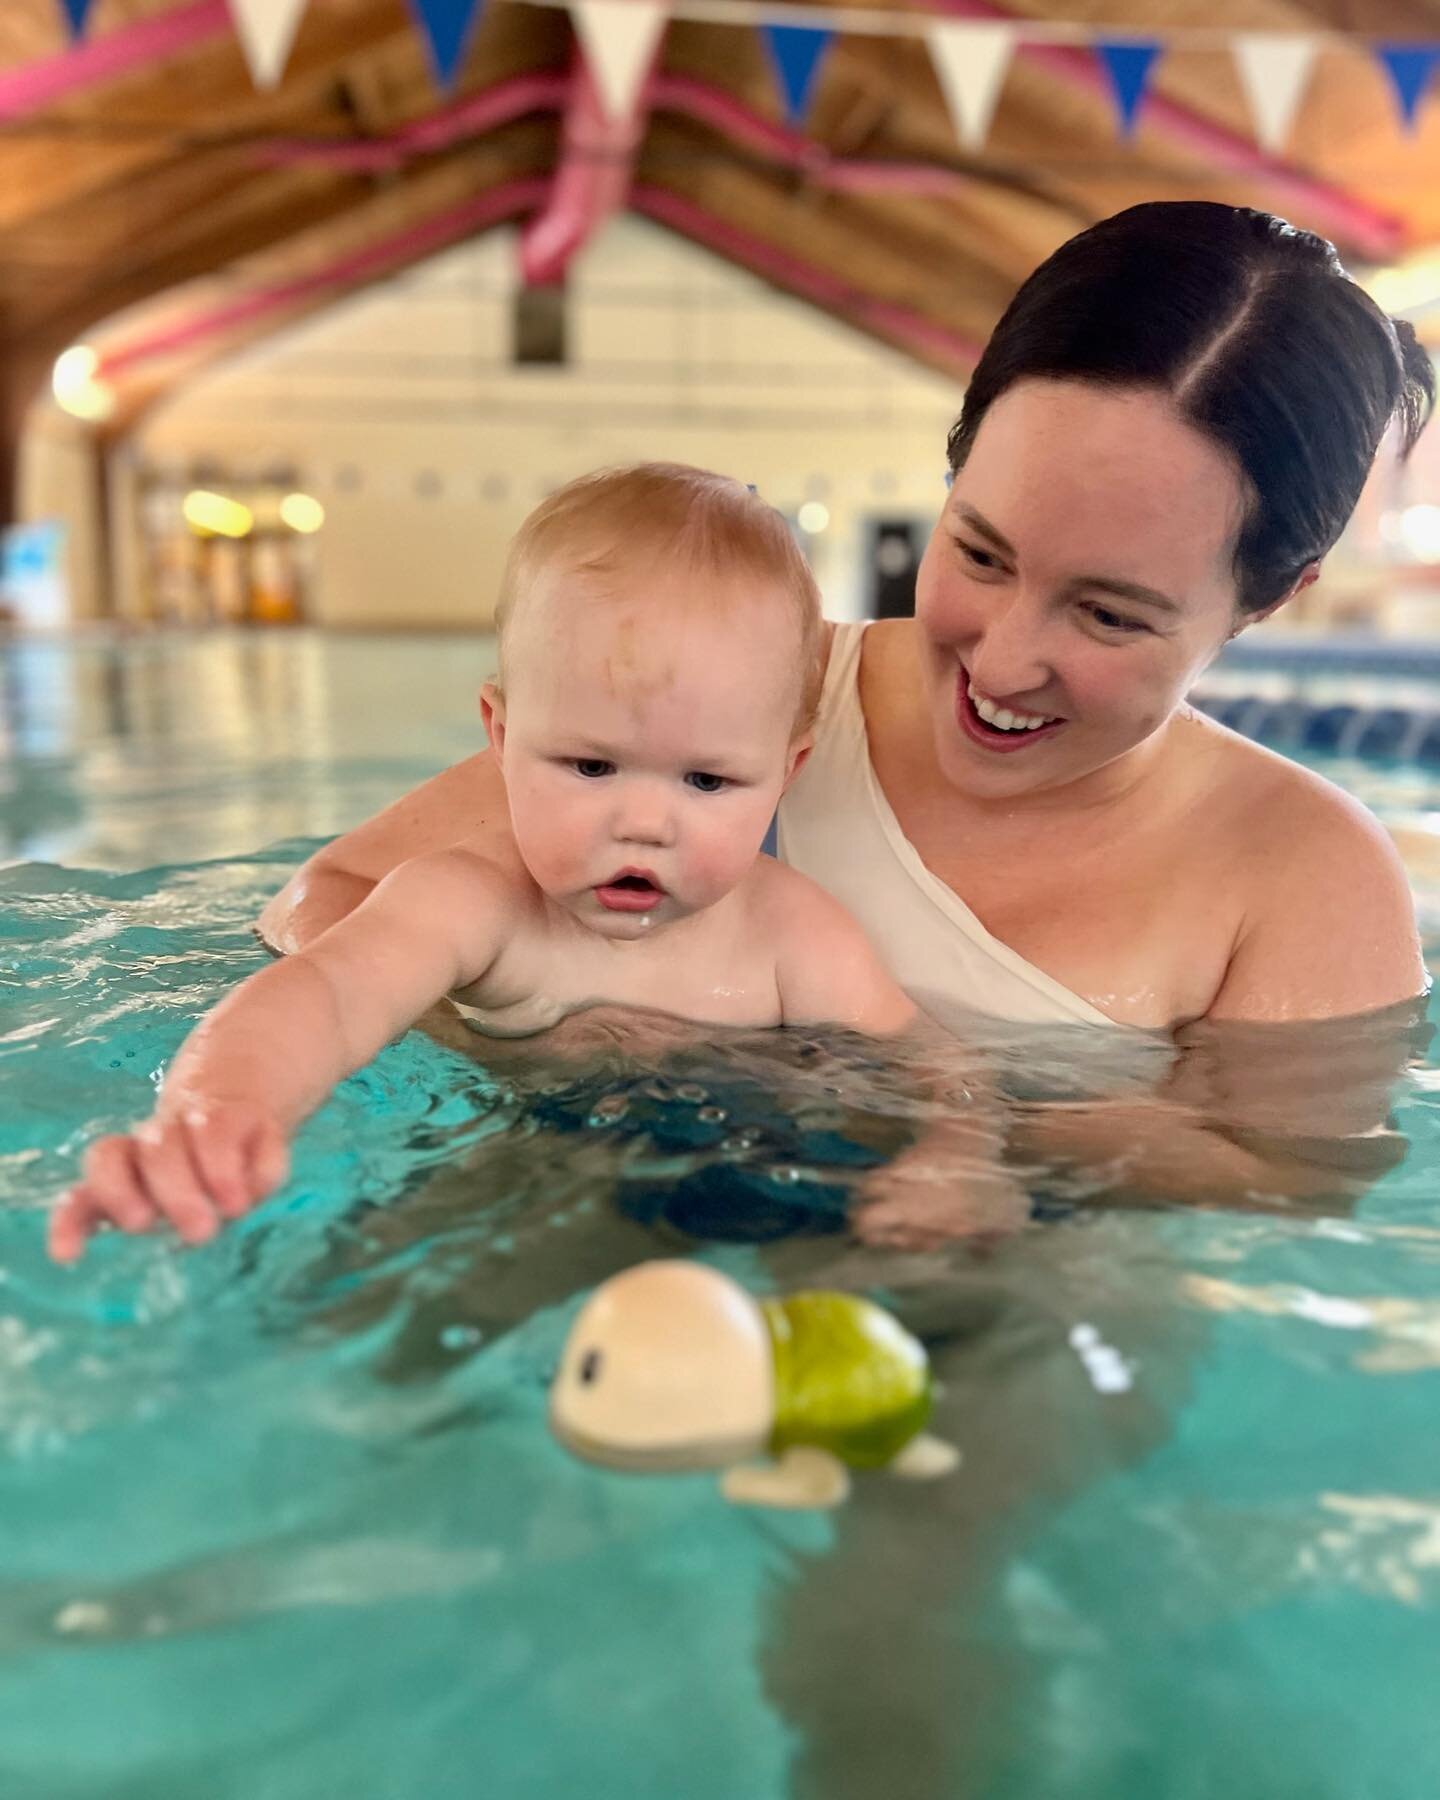 Starting swim lessons with your infant can be so beneficial! Here&rsquo;s why: 

🌟 Early exposure to water helps infants become more familiar and comfortable in water environments. This can contribute to developing essential water safety skills and 